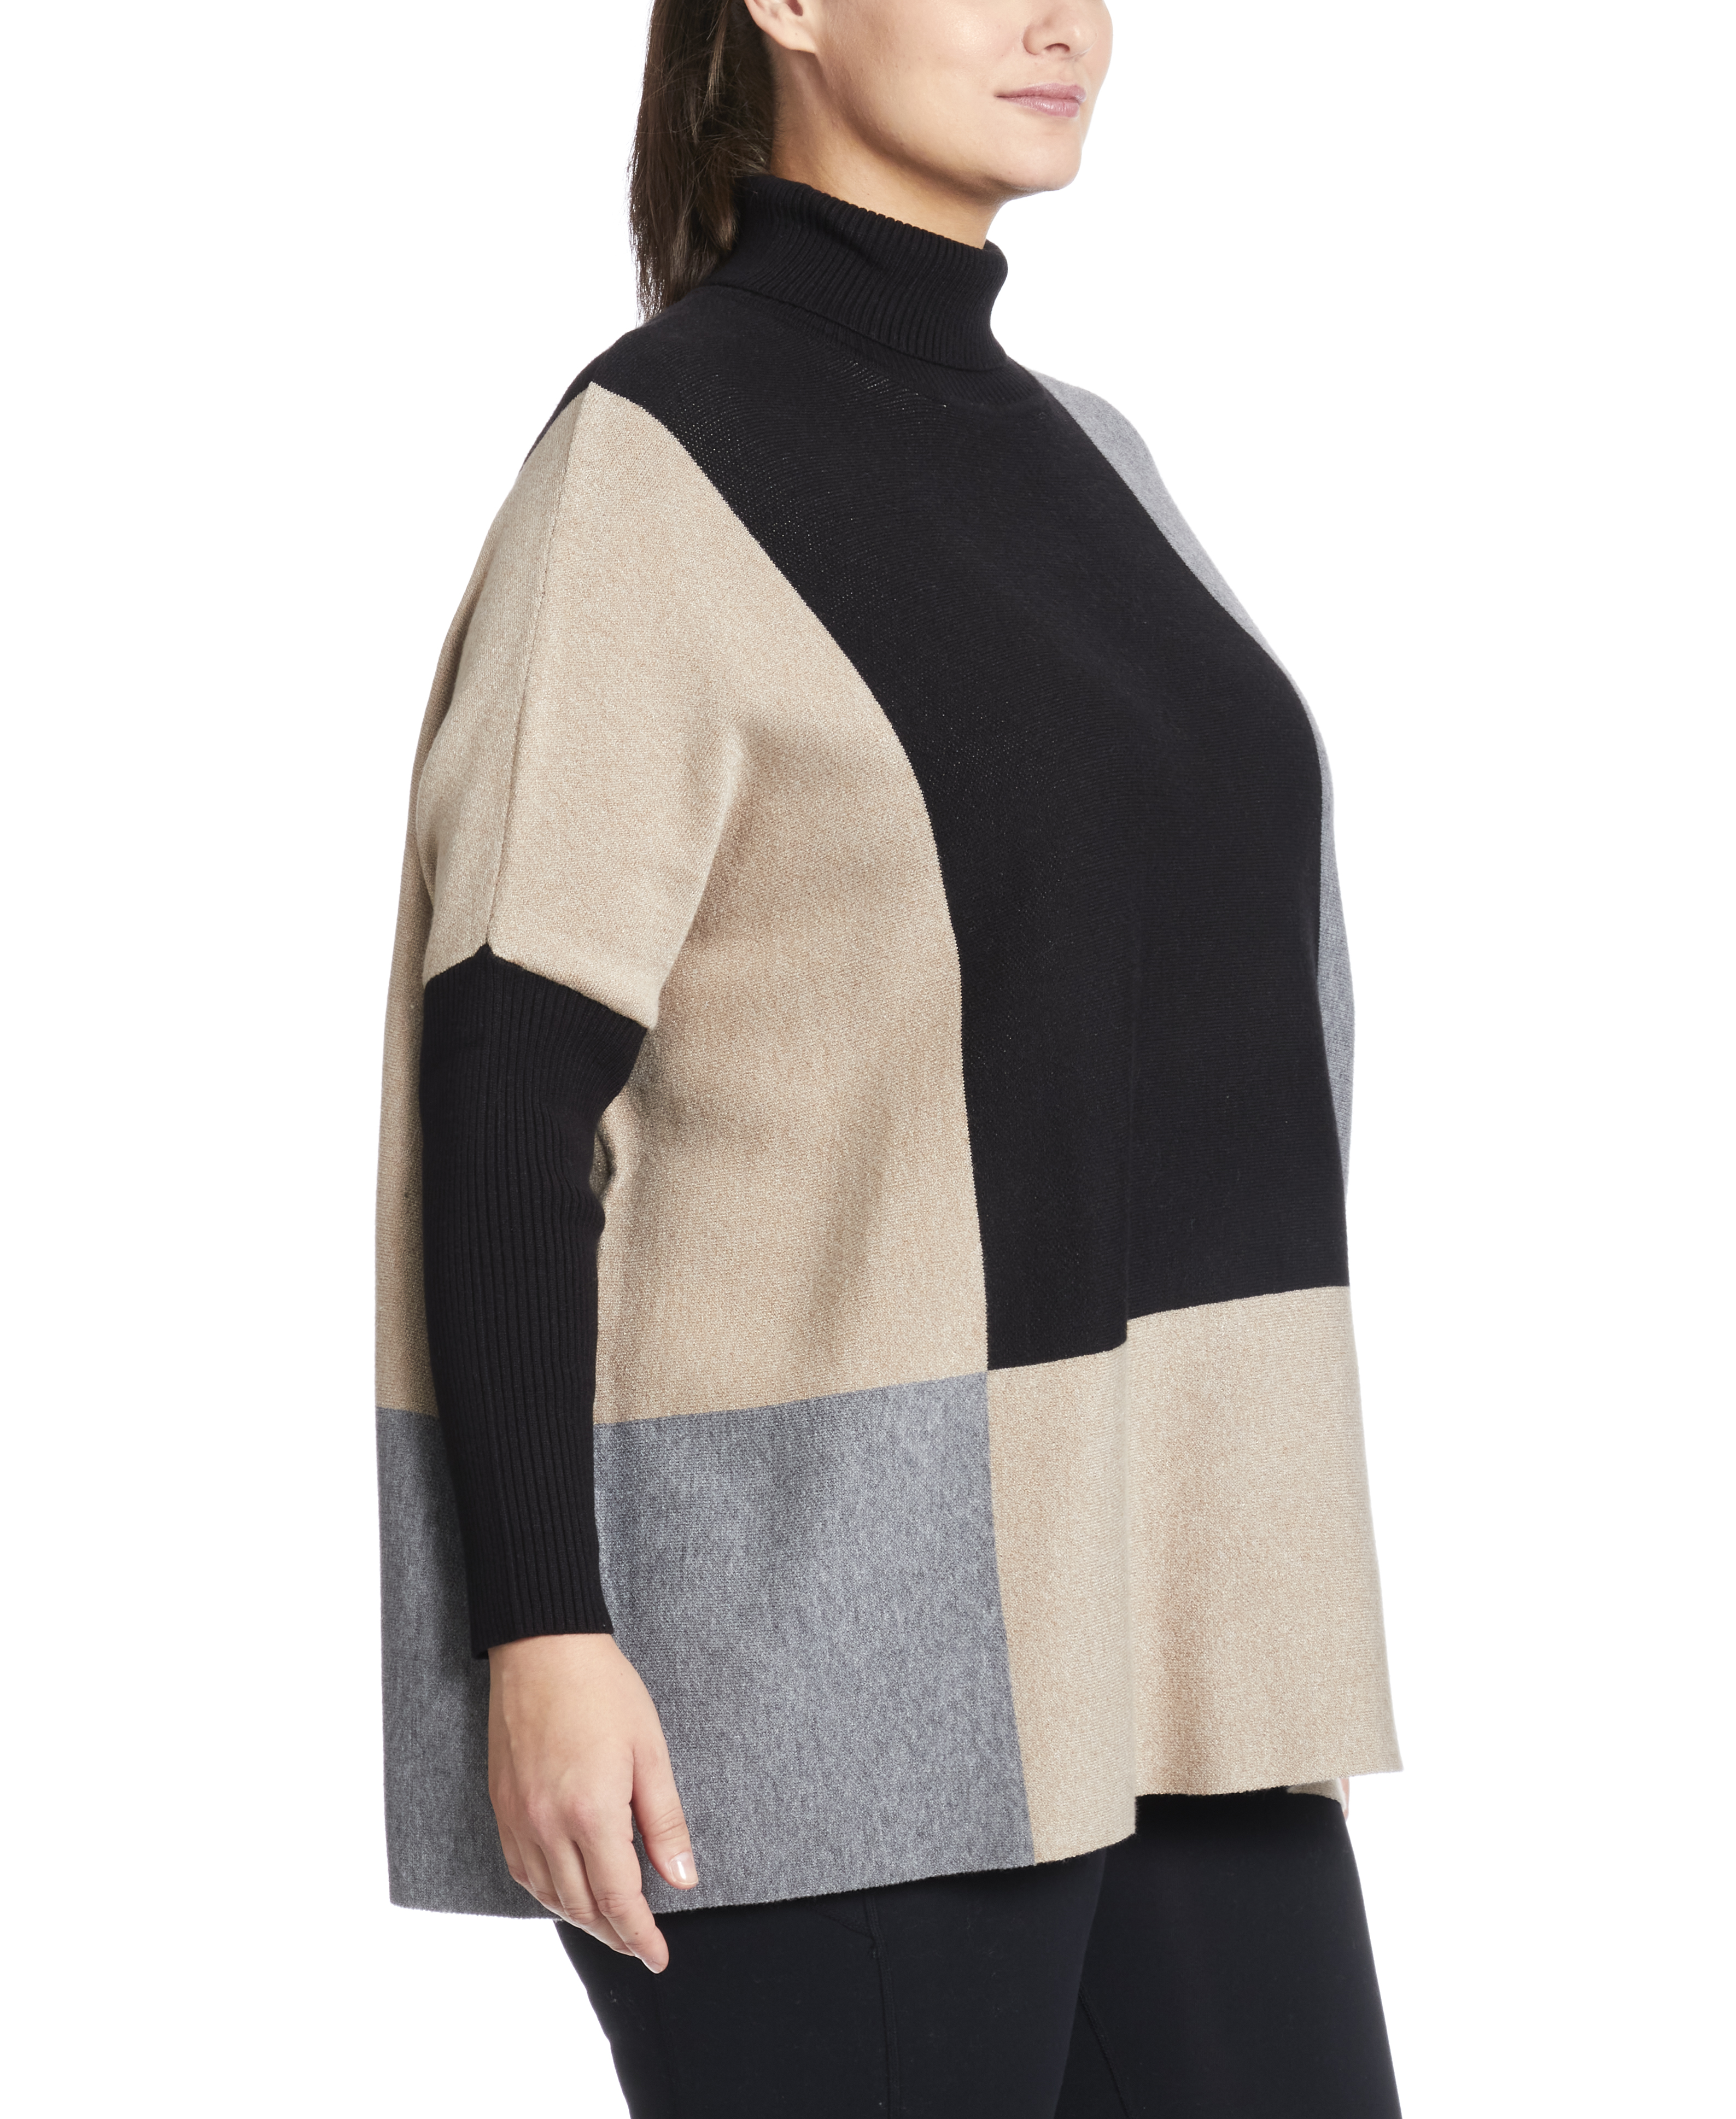 Turtle Neck Poncho Sweater in Colorblock Neutral